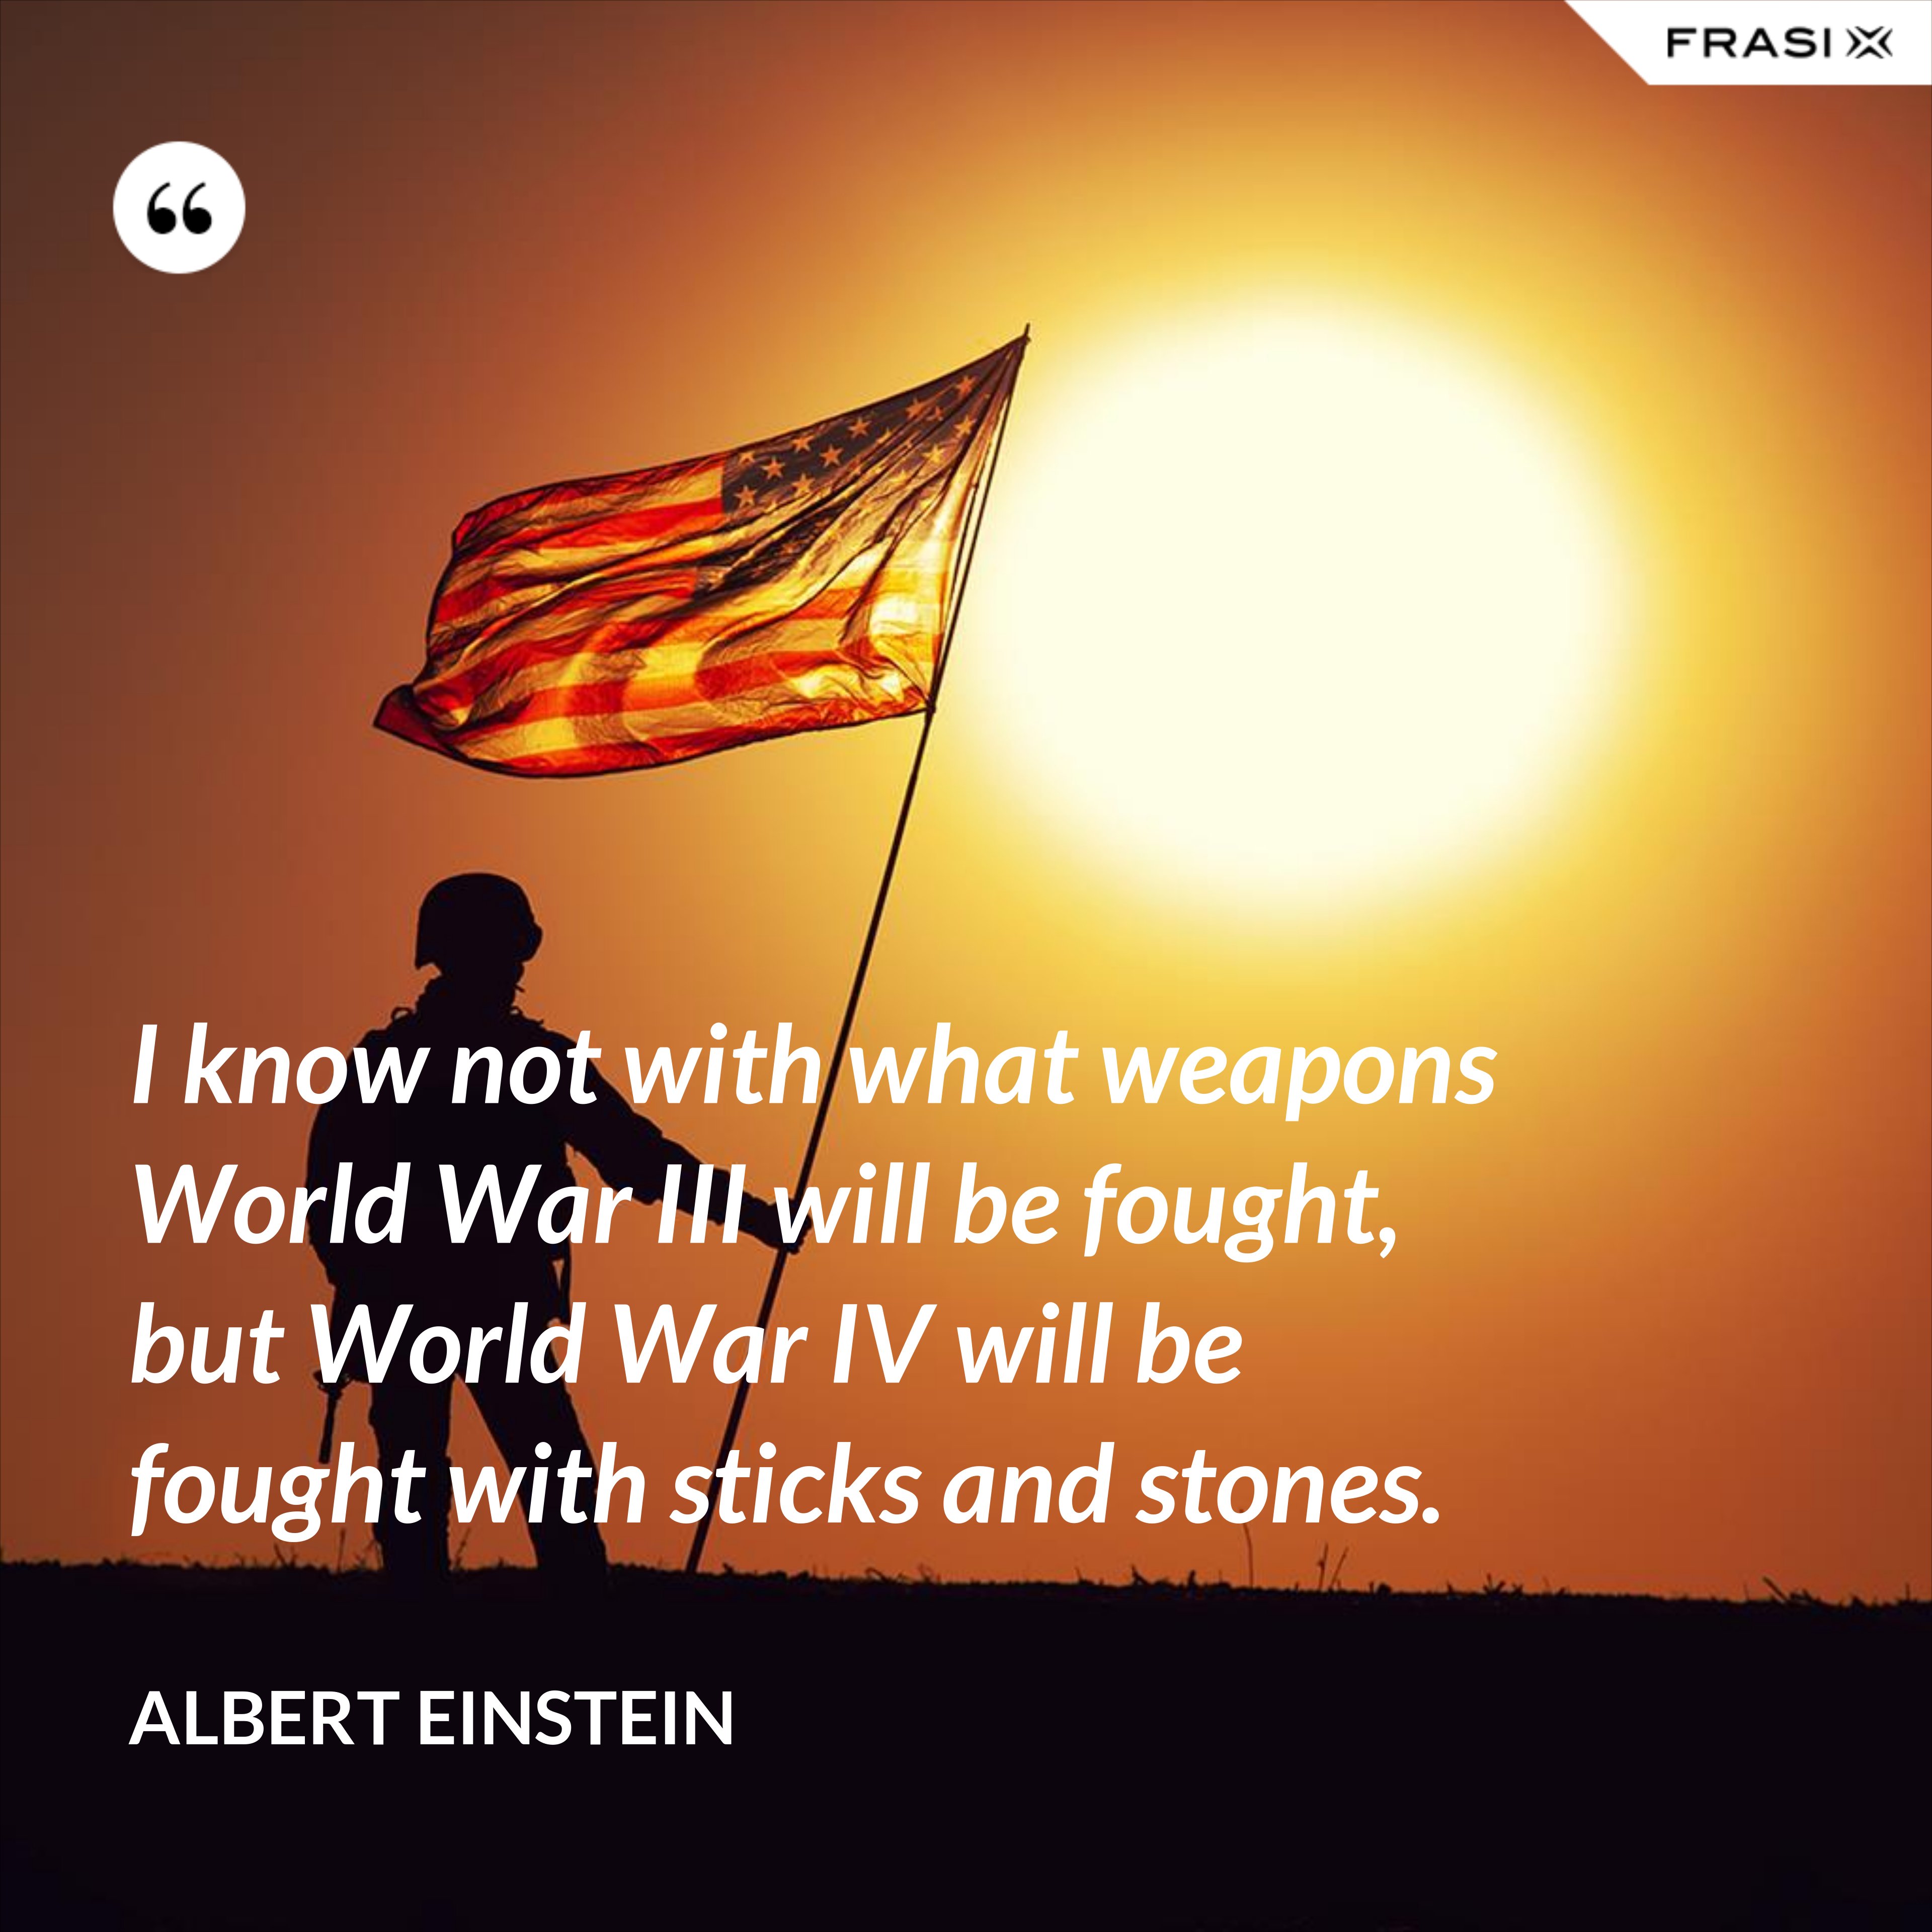 I know not with what weapons World War III will be fought, but World War IV will be fought with sticks and stones. - Albert Einstein